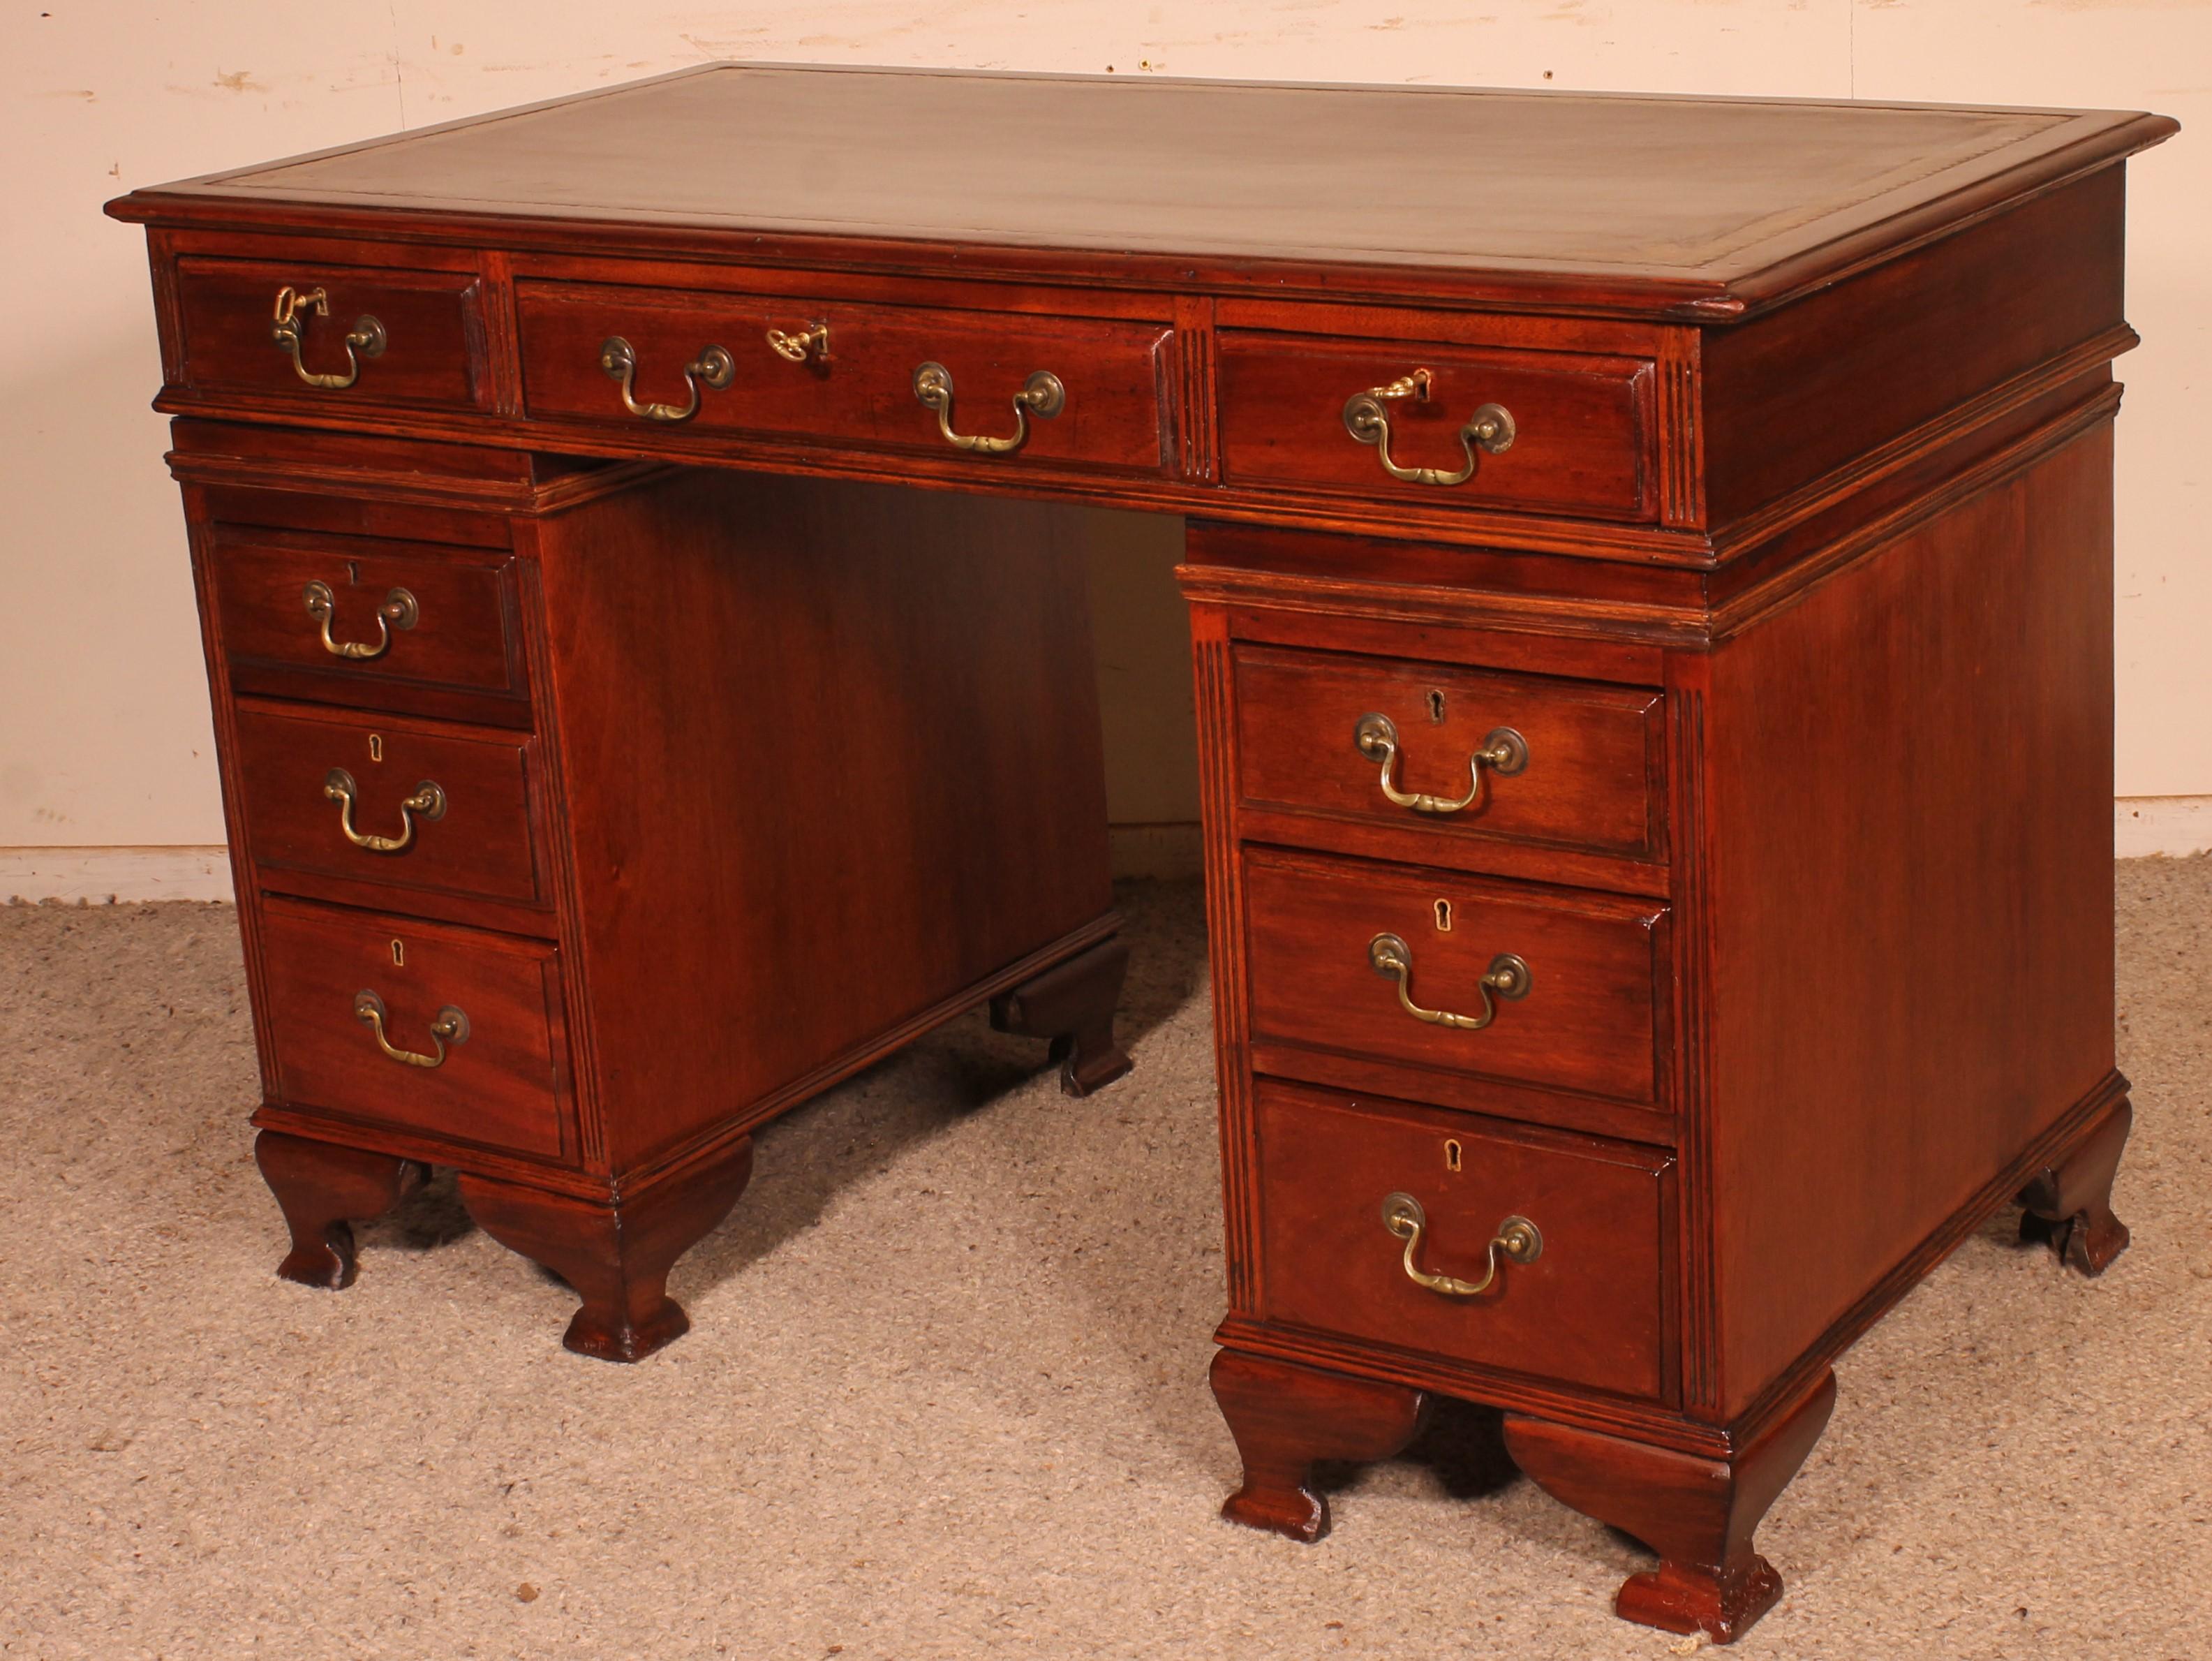 Victorian Small Mahogany Pedestal Desk From The 19 ° Century For Sale